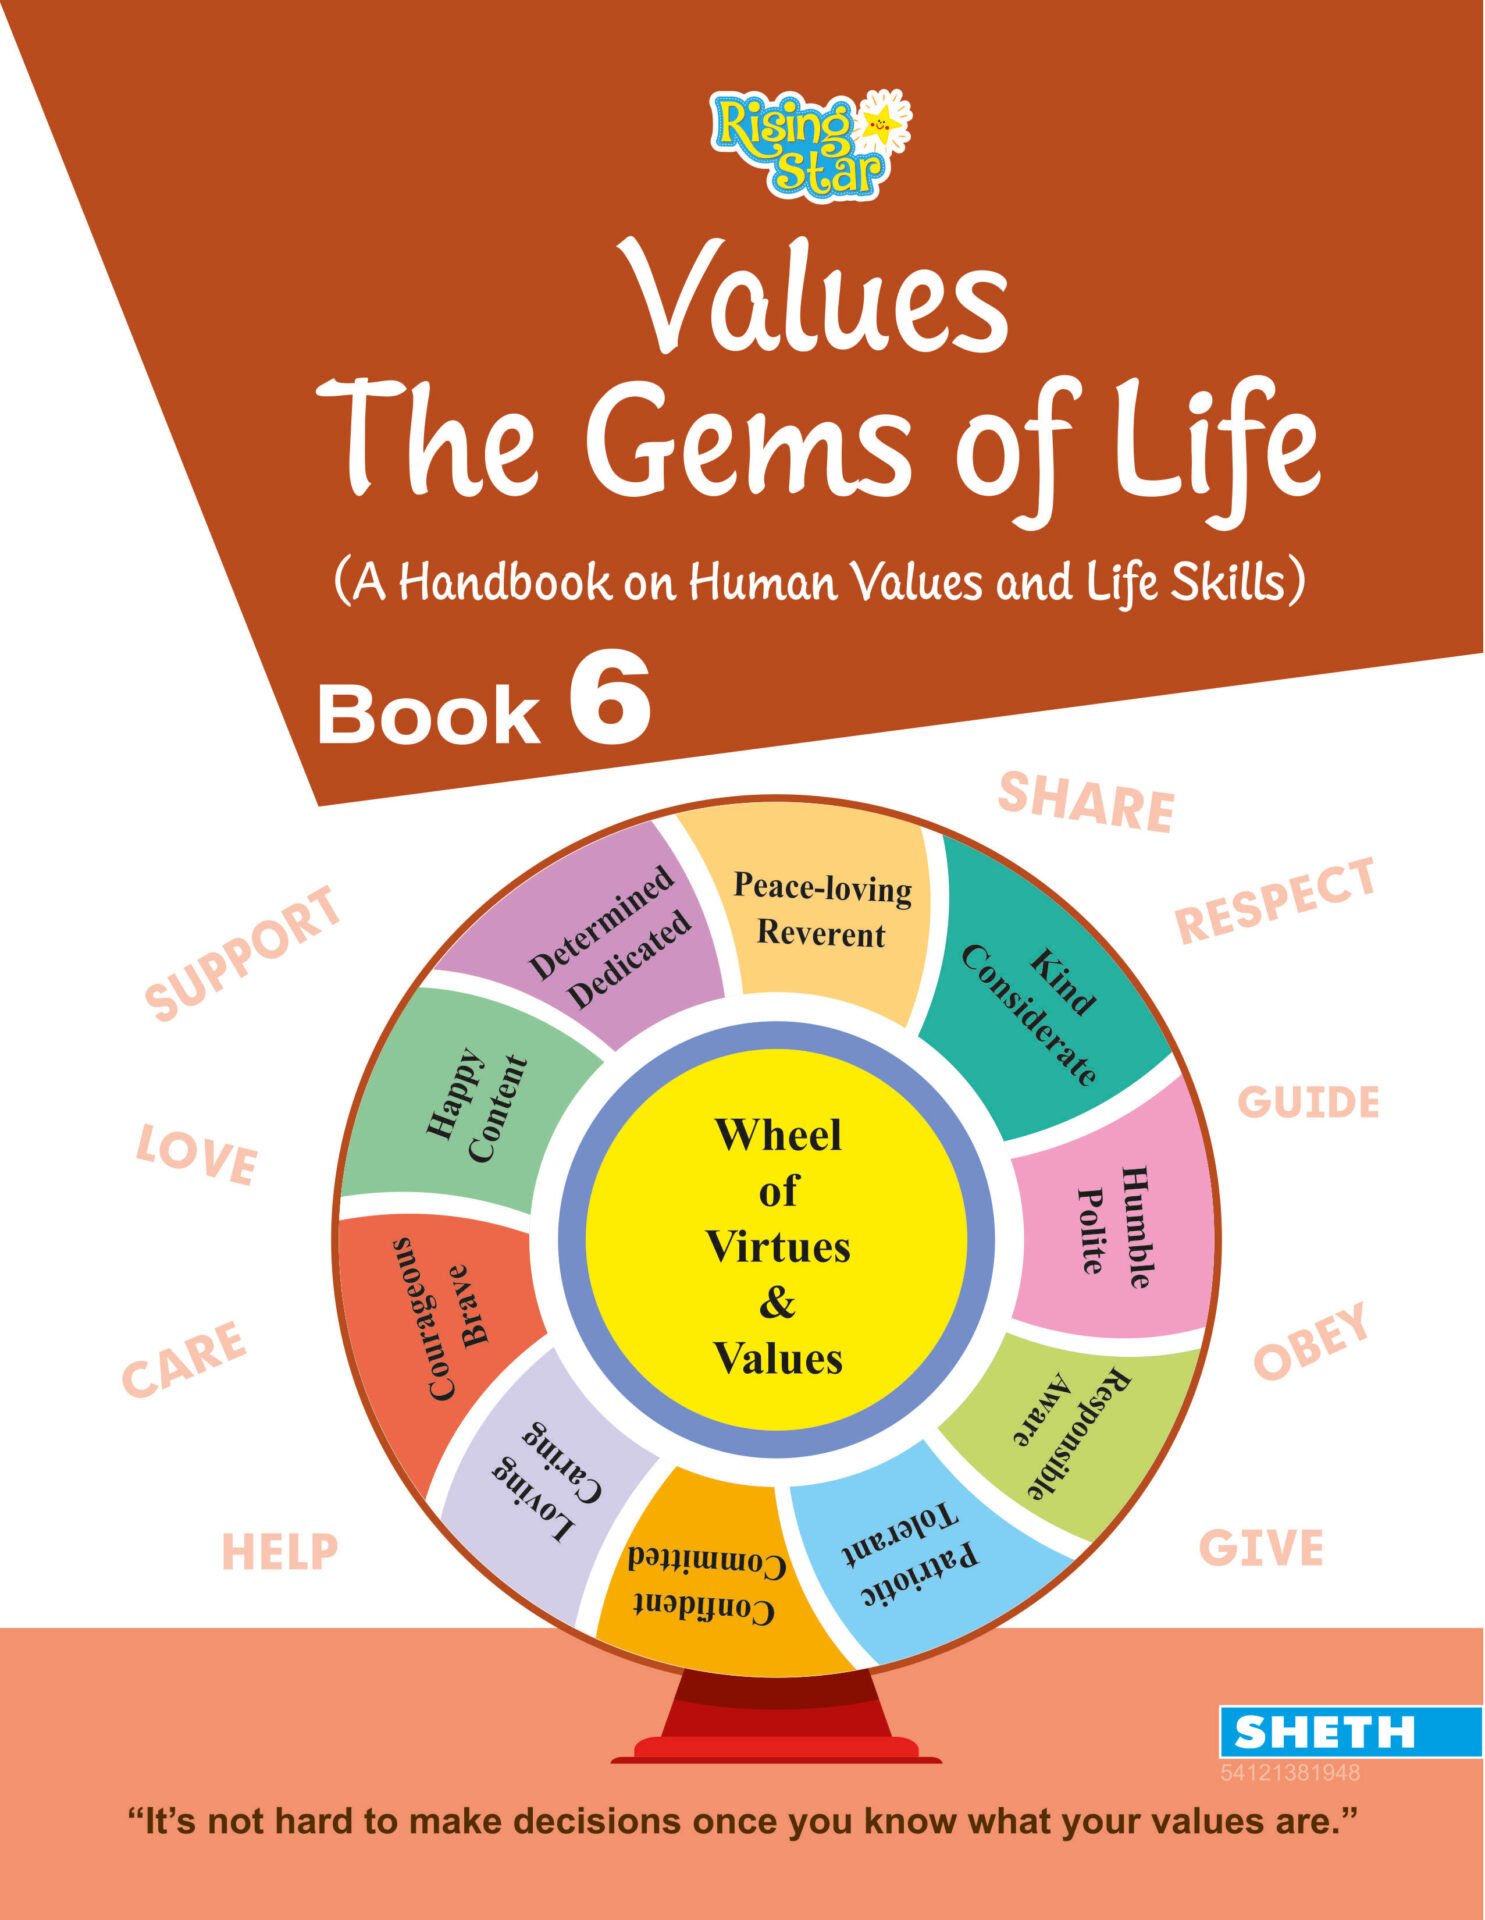 Rising Star Values The Gems of Life Book 6 1 1